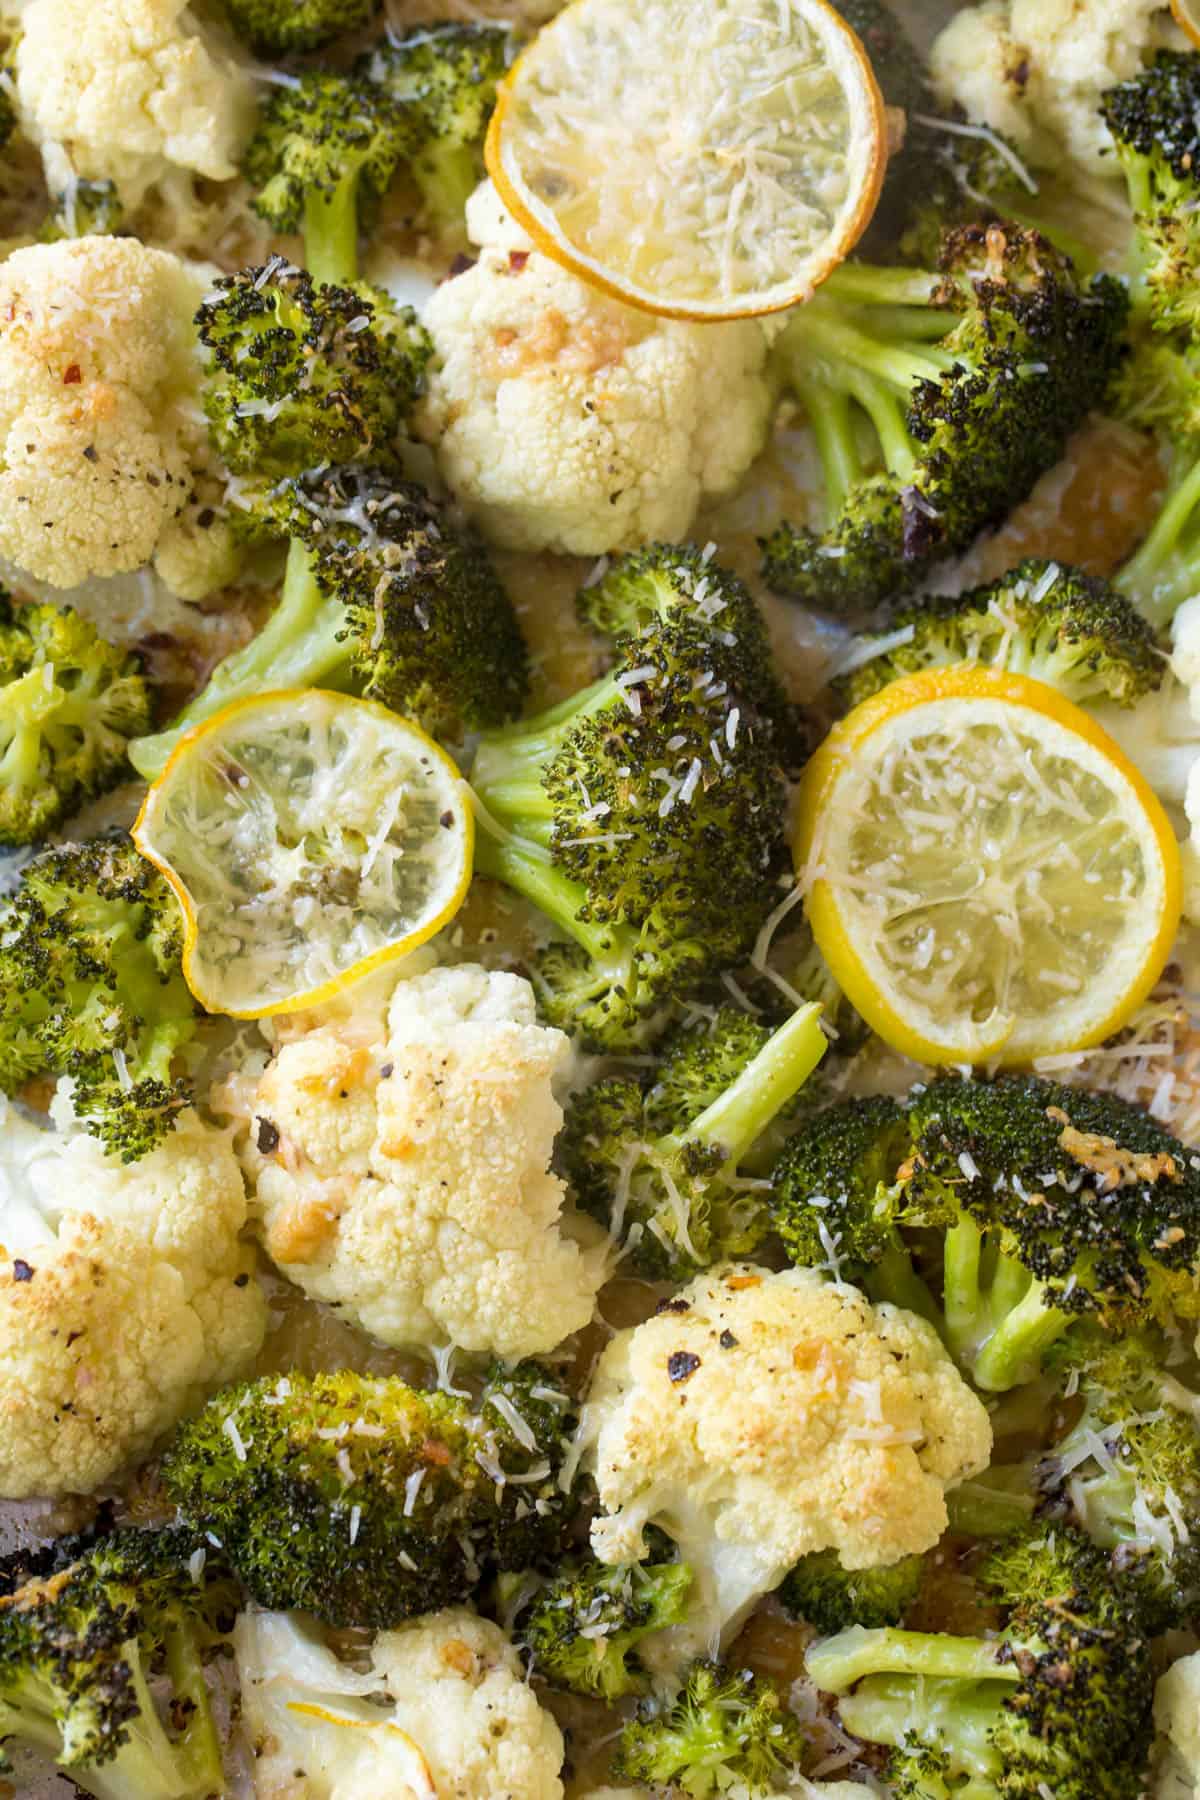 Cooked broccoli and cauliflower with lemon slices on top.